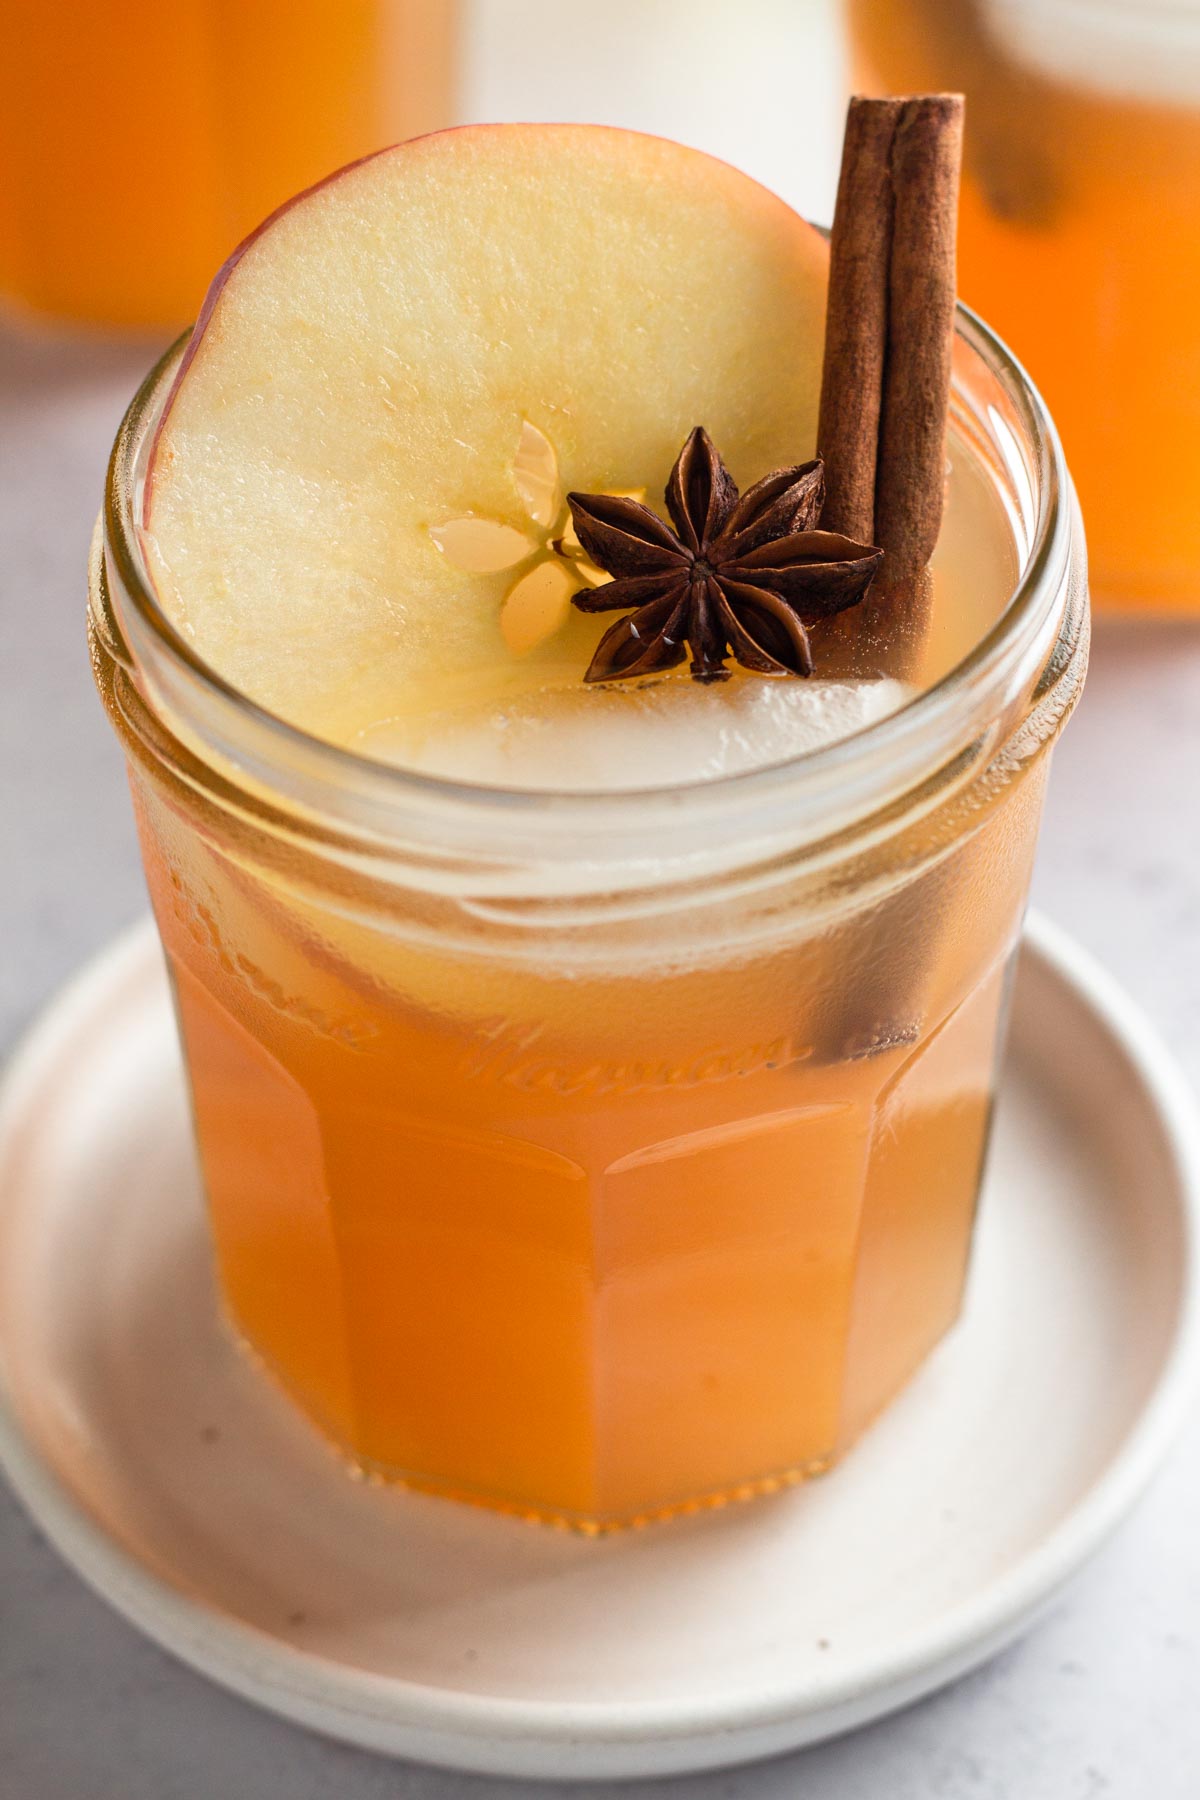 Close up view of punch in a glass on a gray surface garnished with an apple slice, cinnamon stick, and star anise.